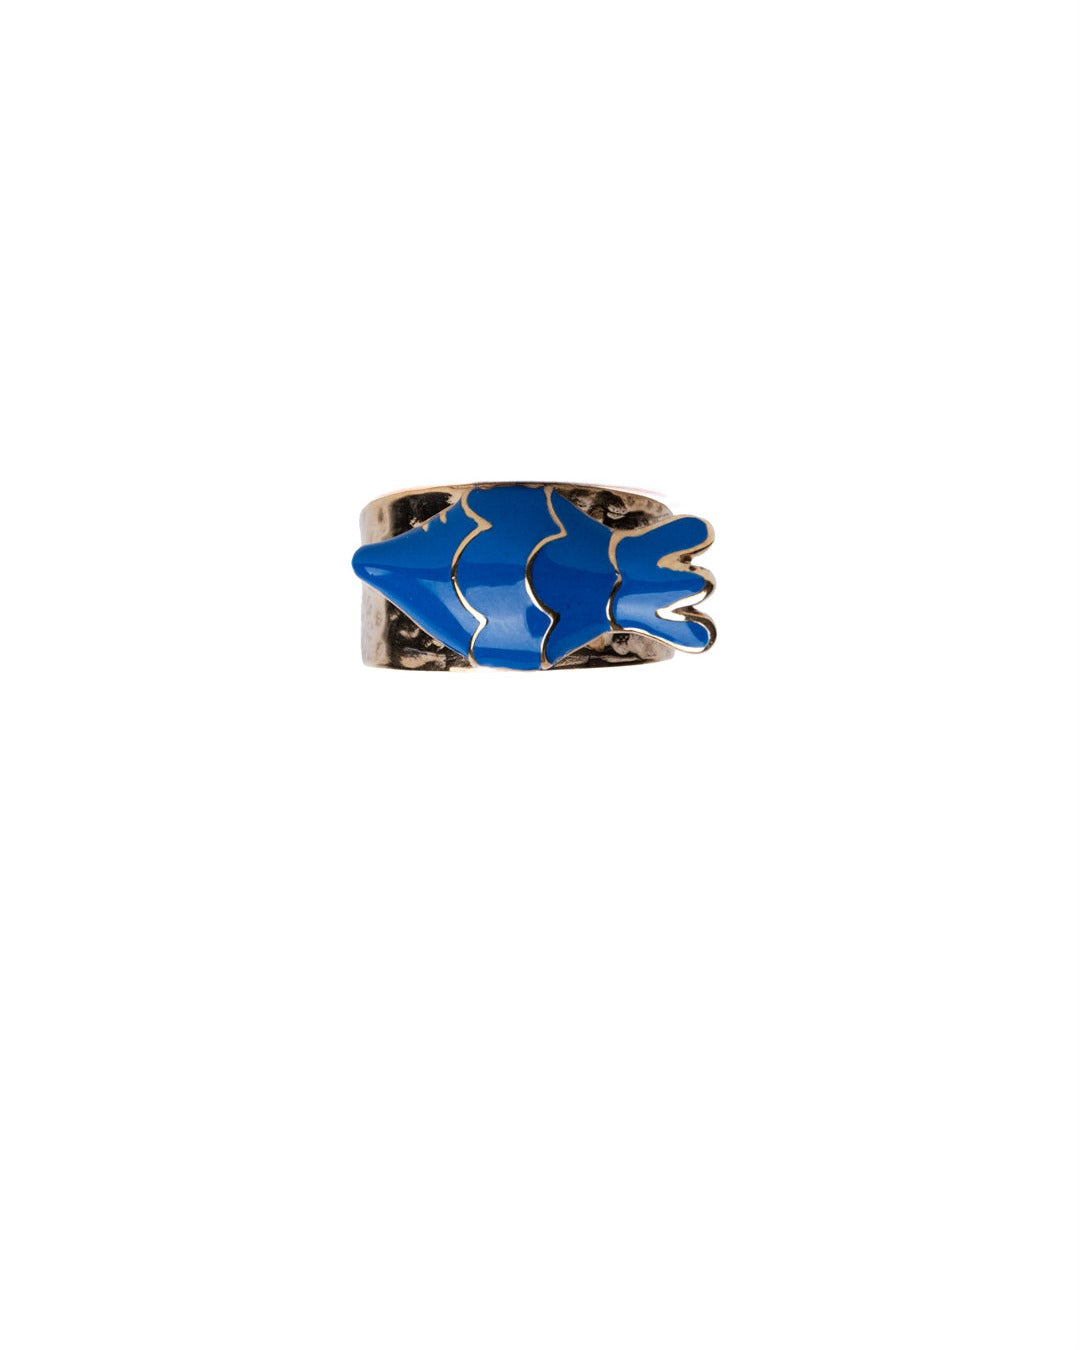 Gino Fish Ring Gold Handmade handcrafted jewelry fun colorful